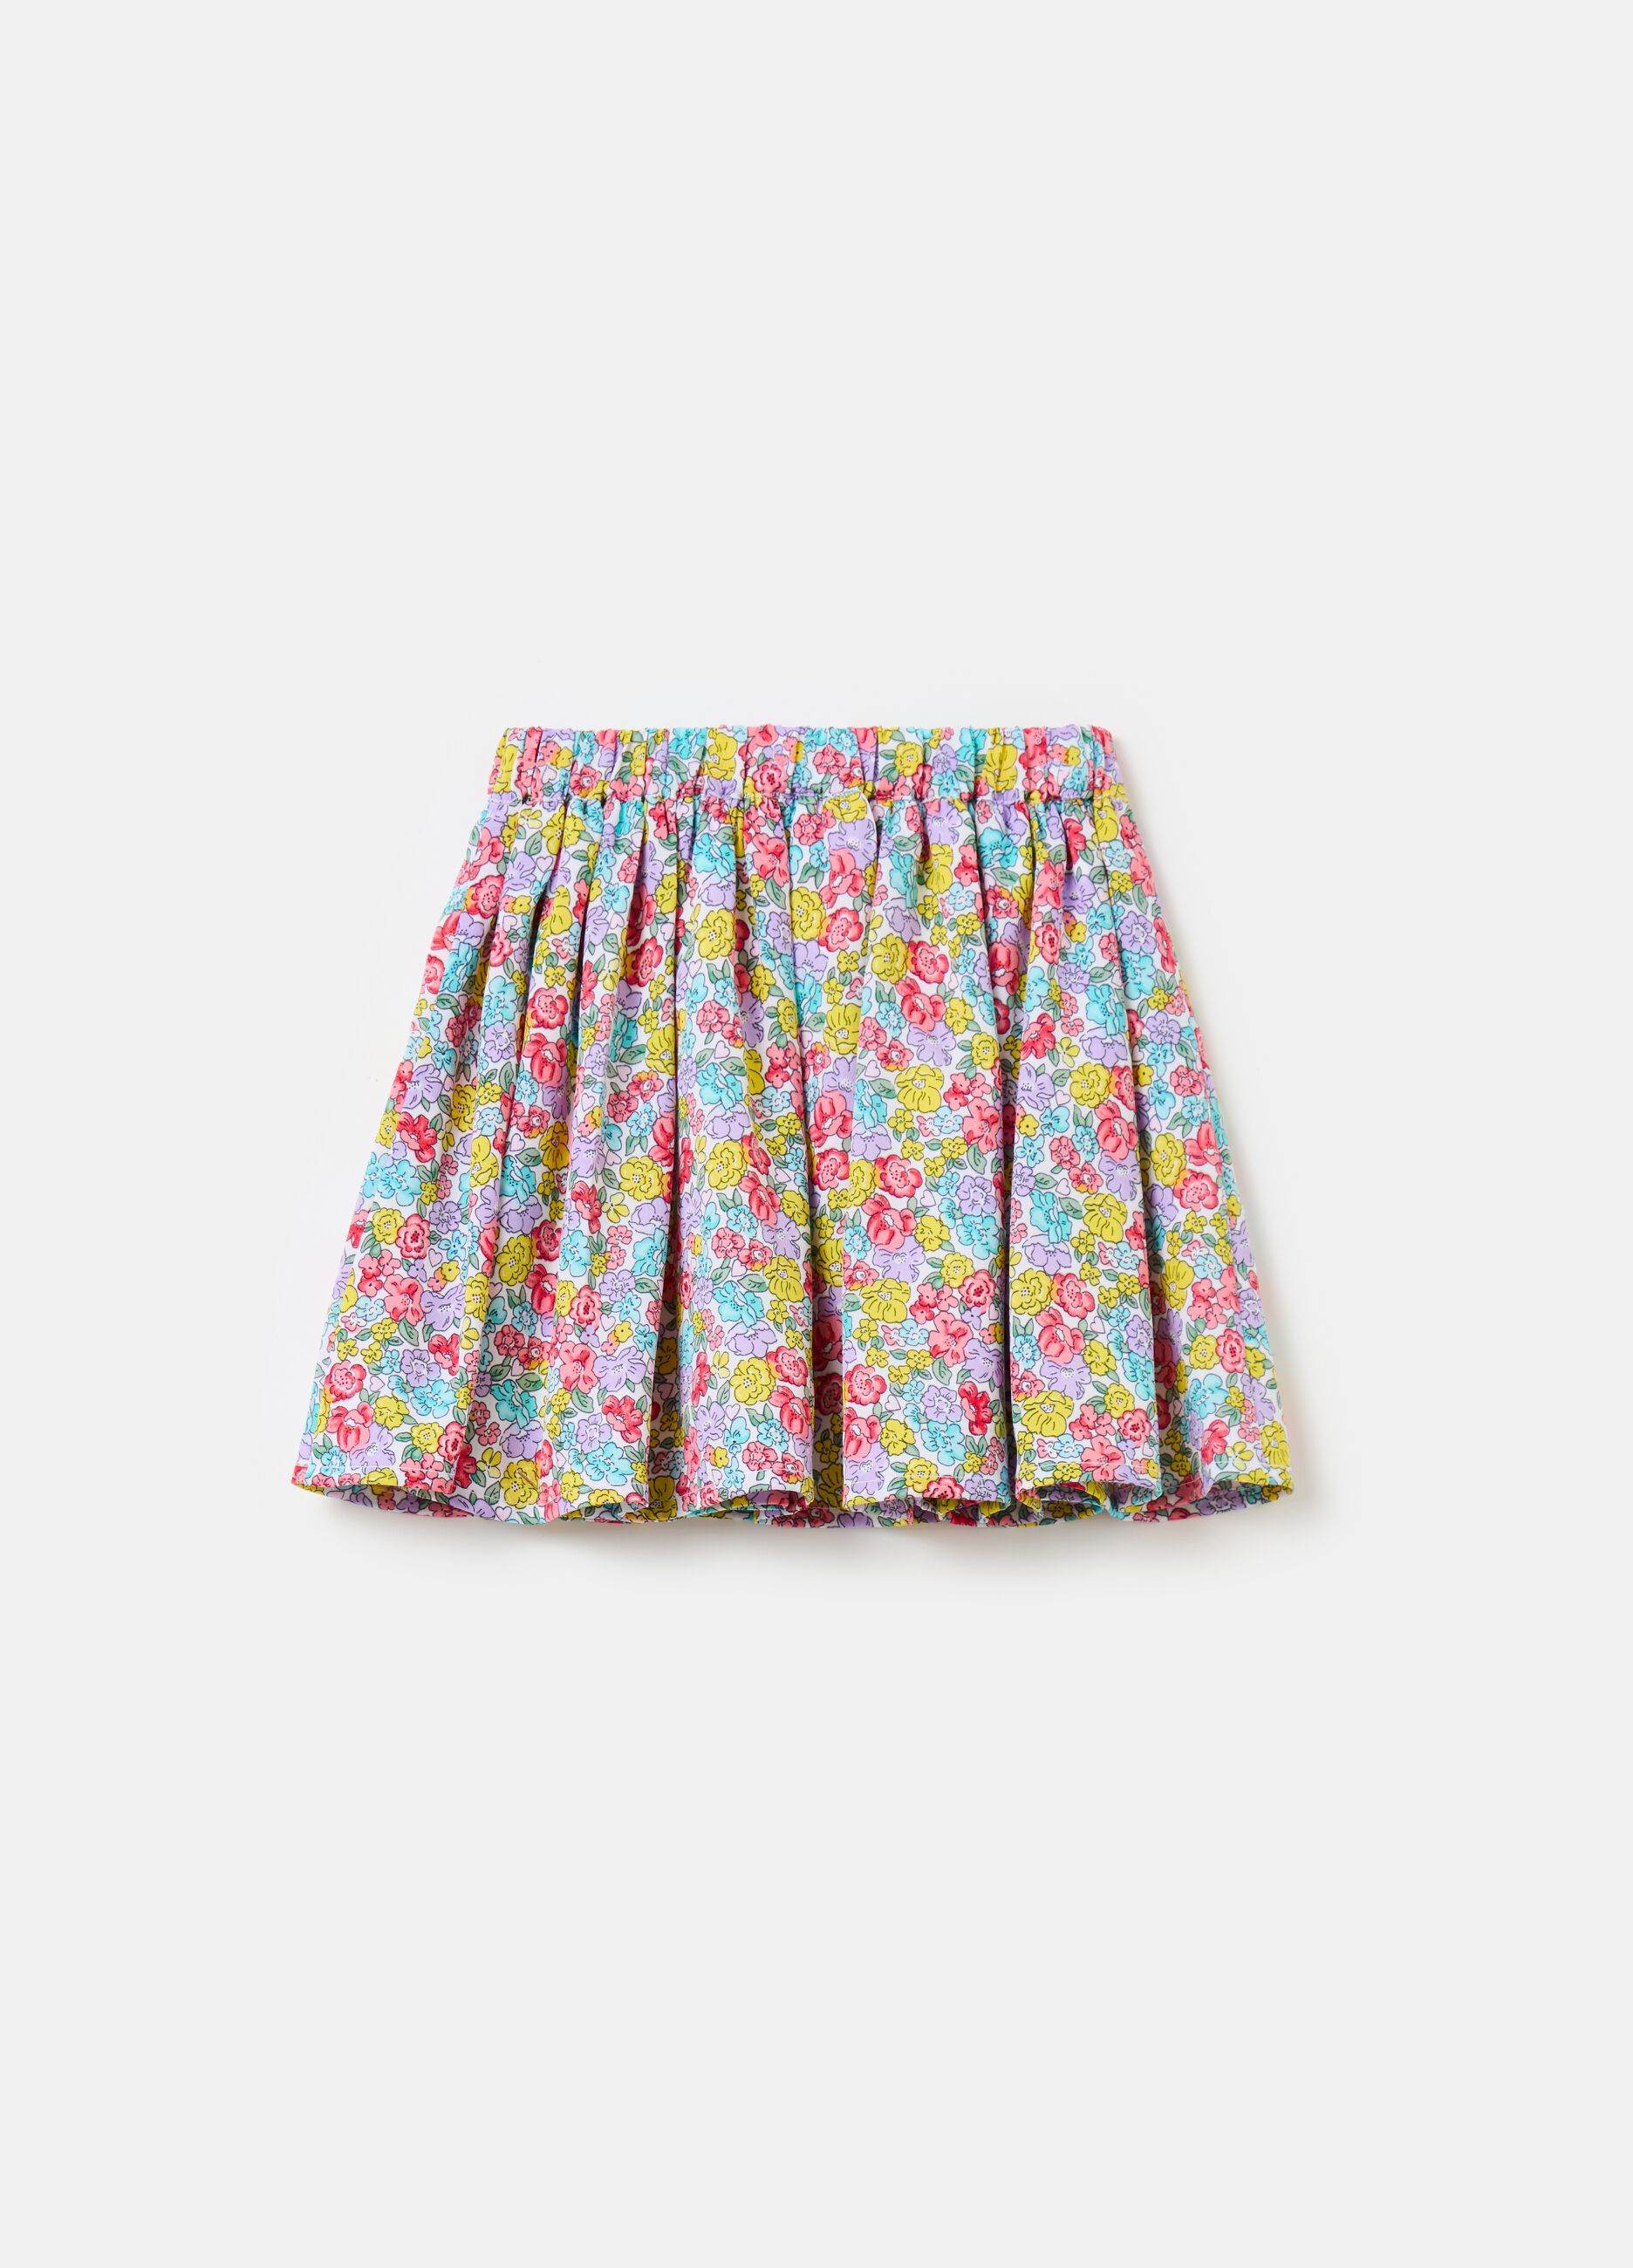 Short skirt with flowers print